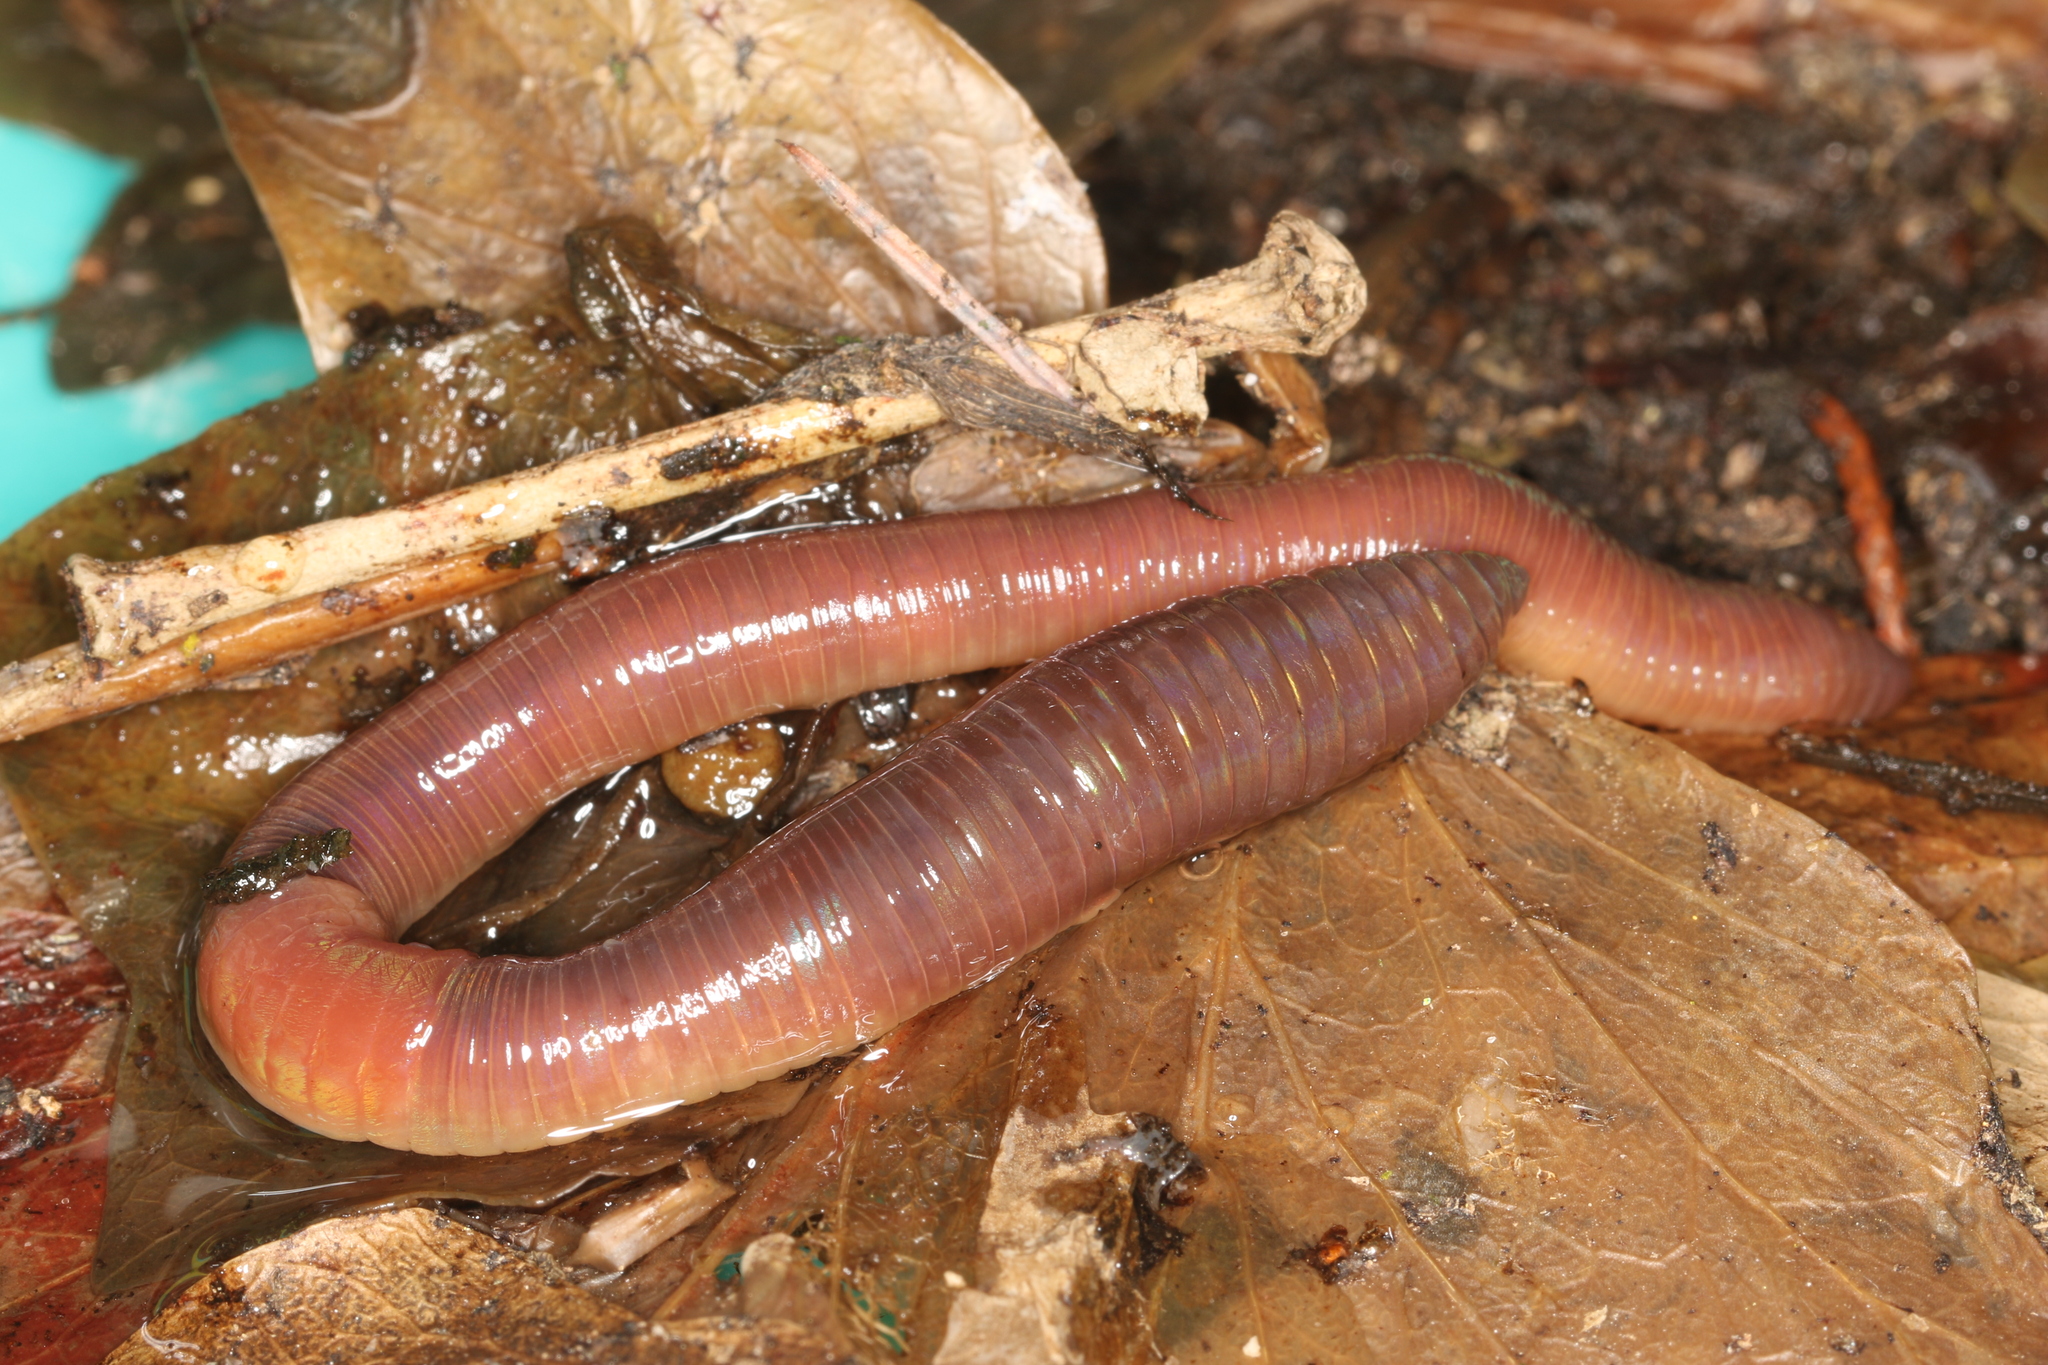 New family for an earthworm genus